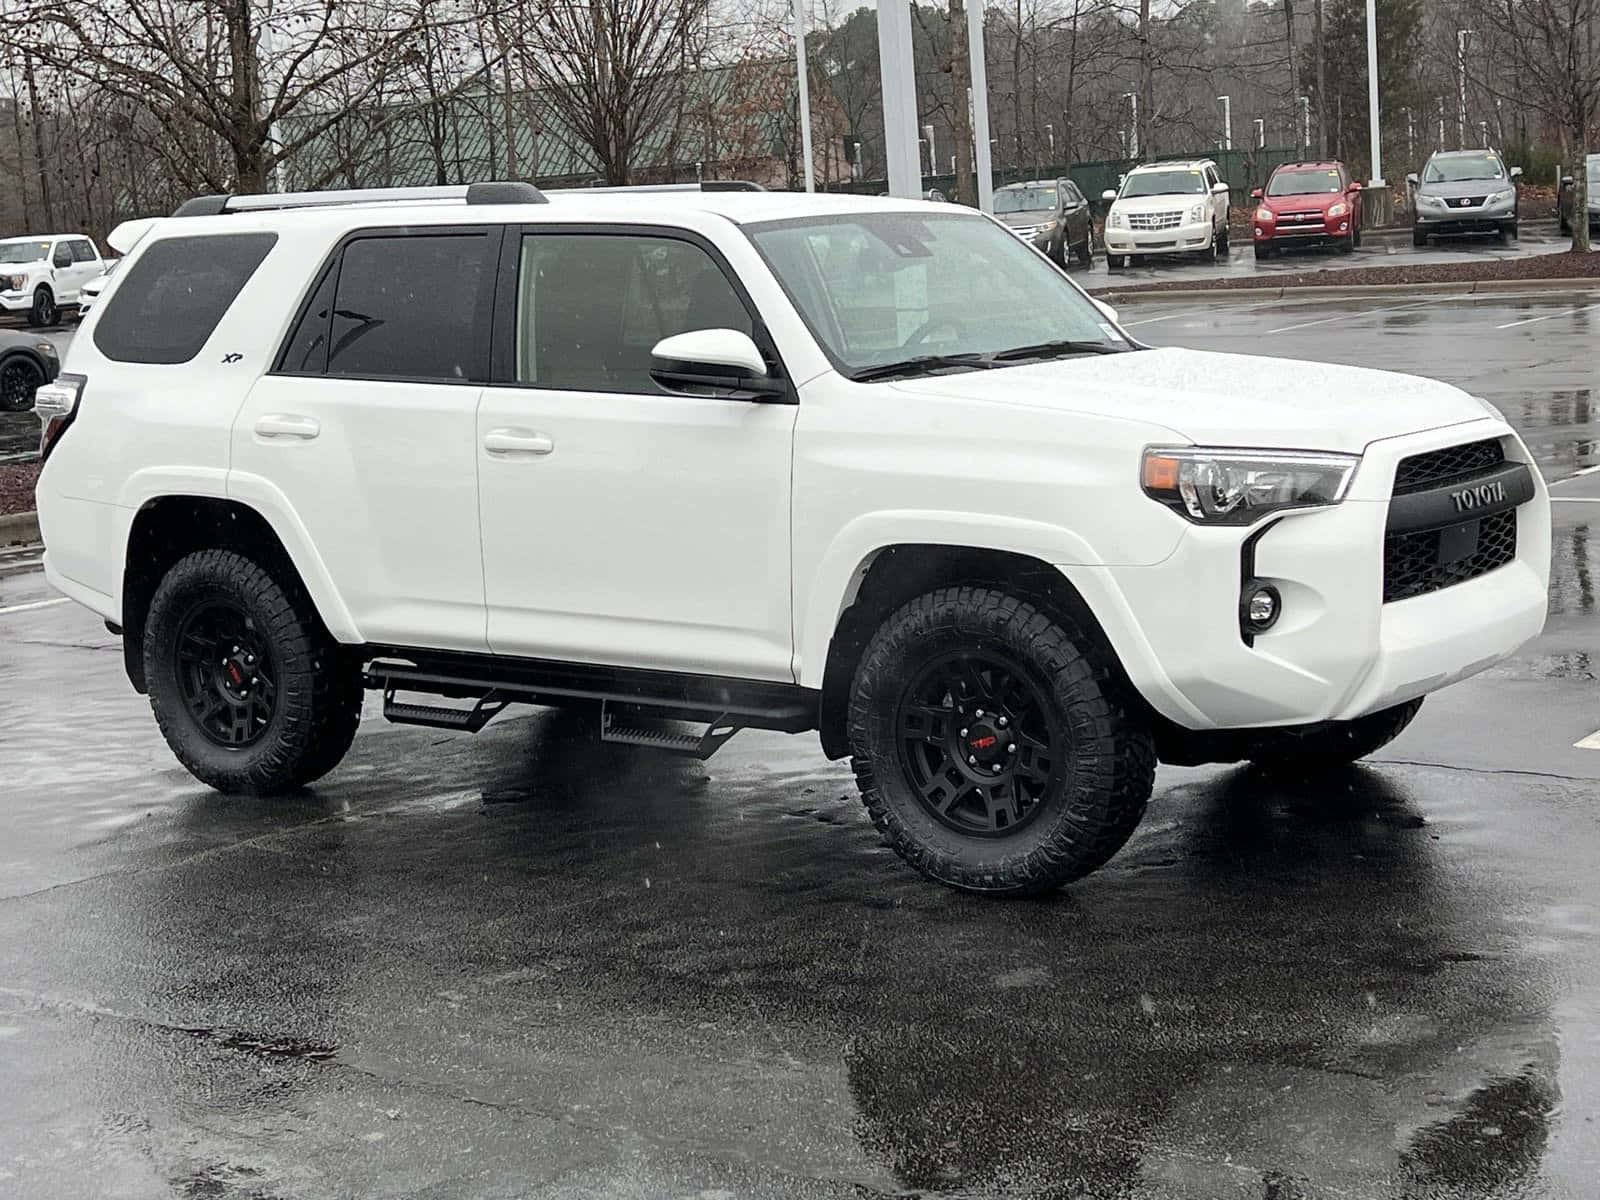 A White Toyota 4runner Is Parked In A Parking Lot